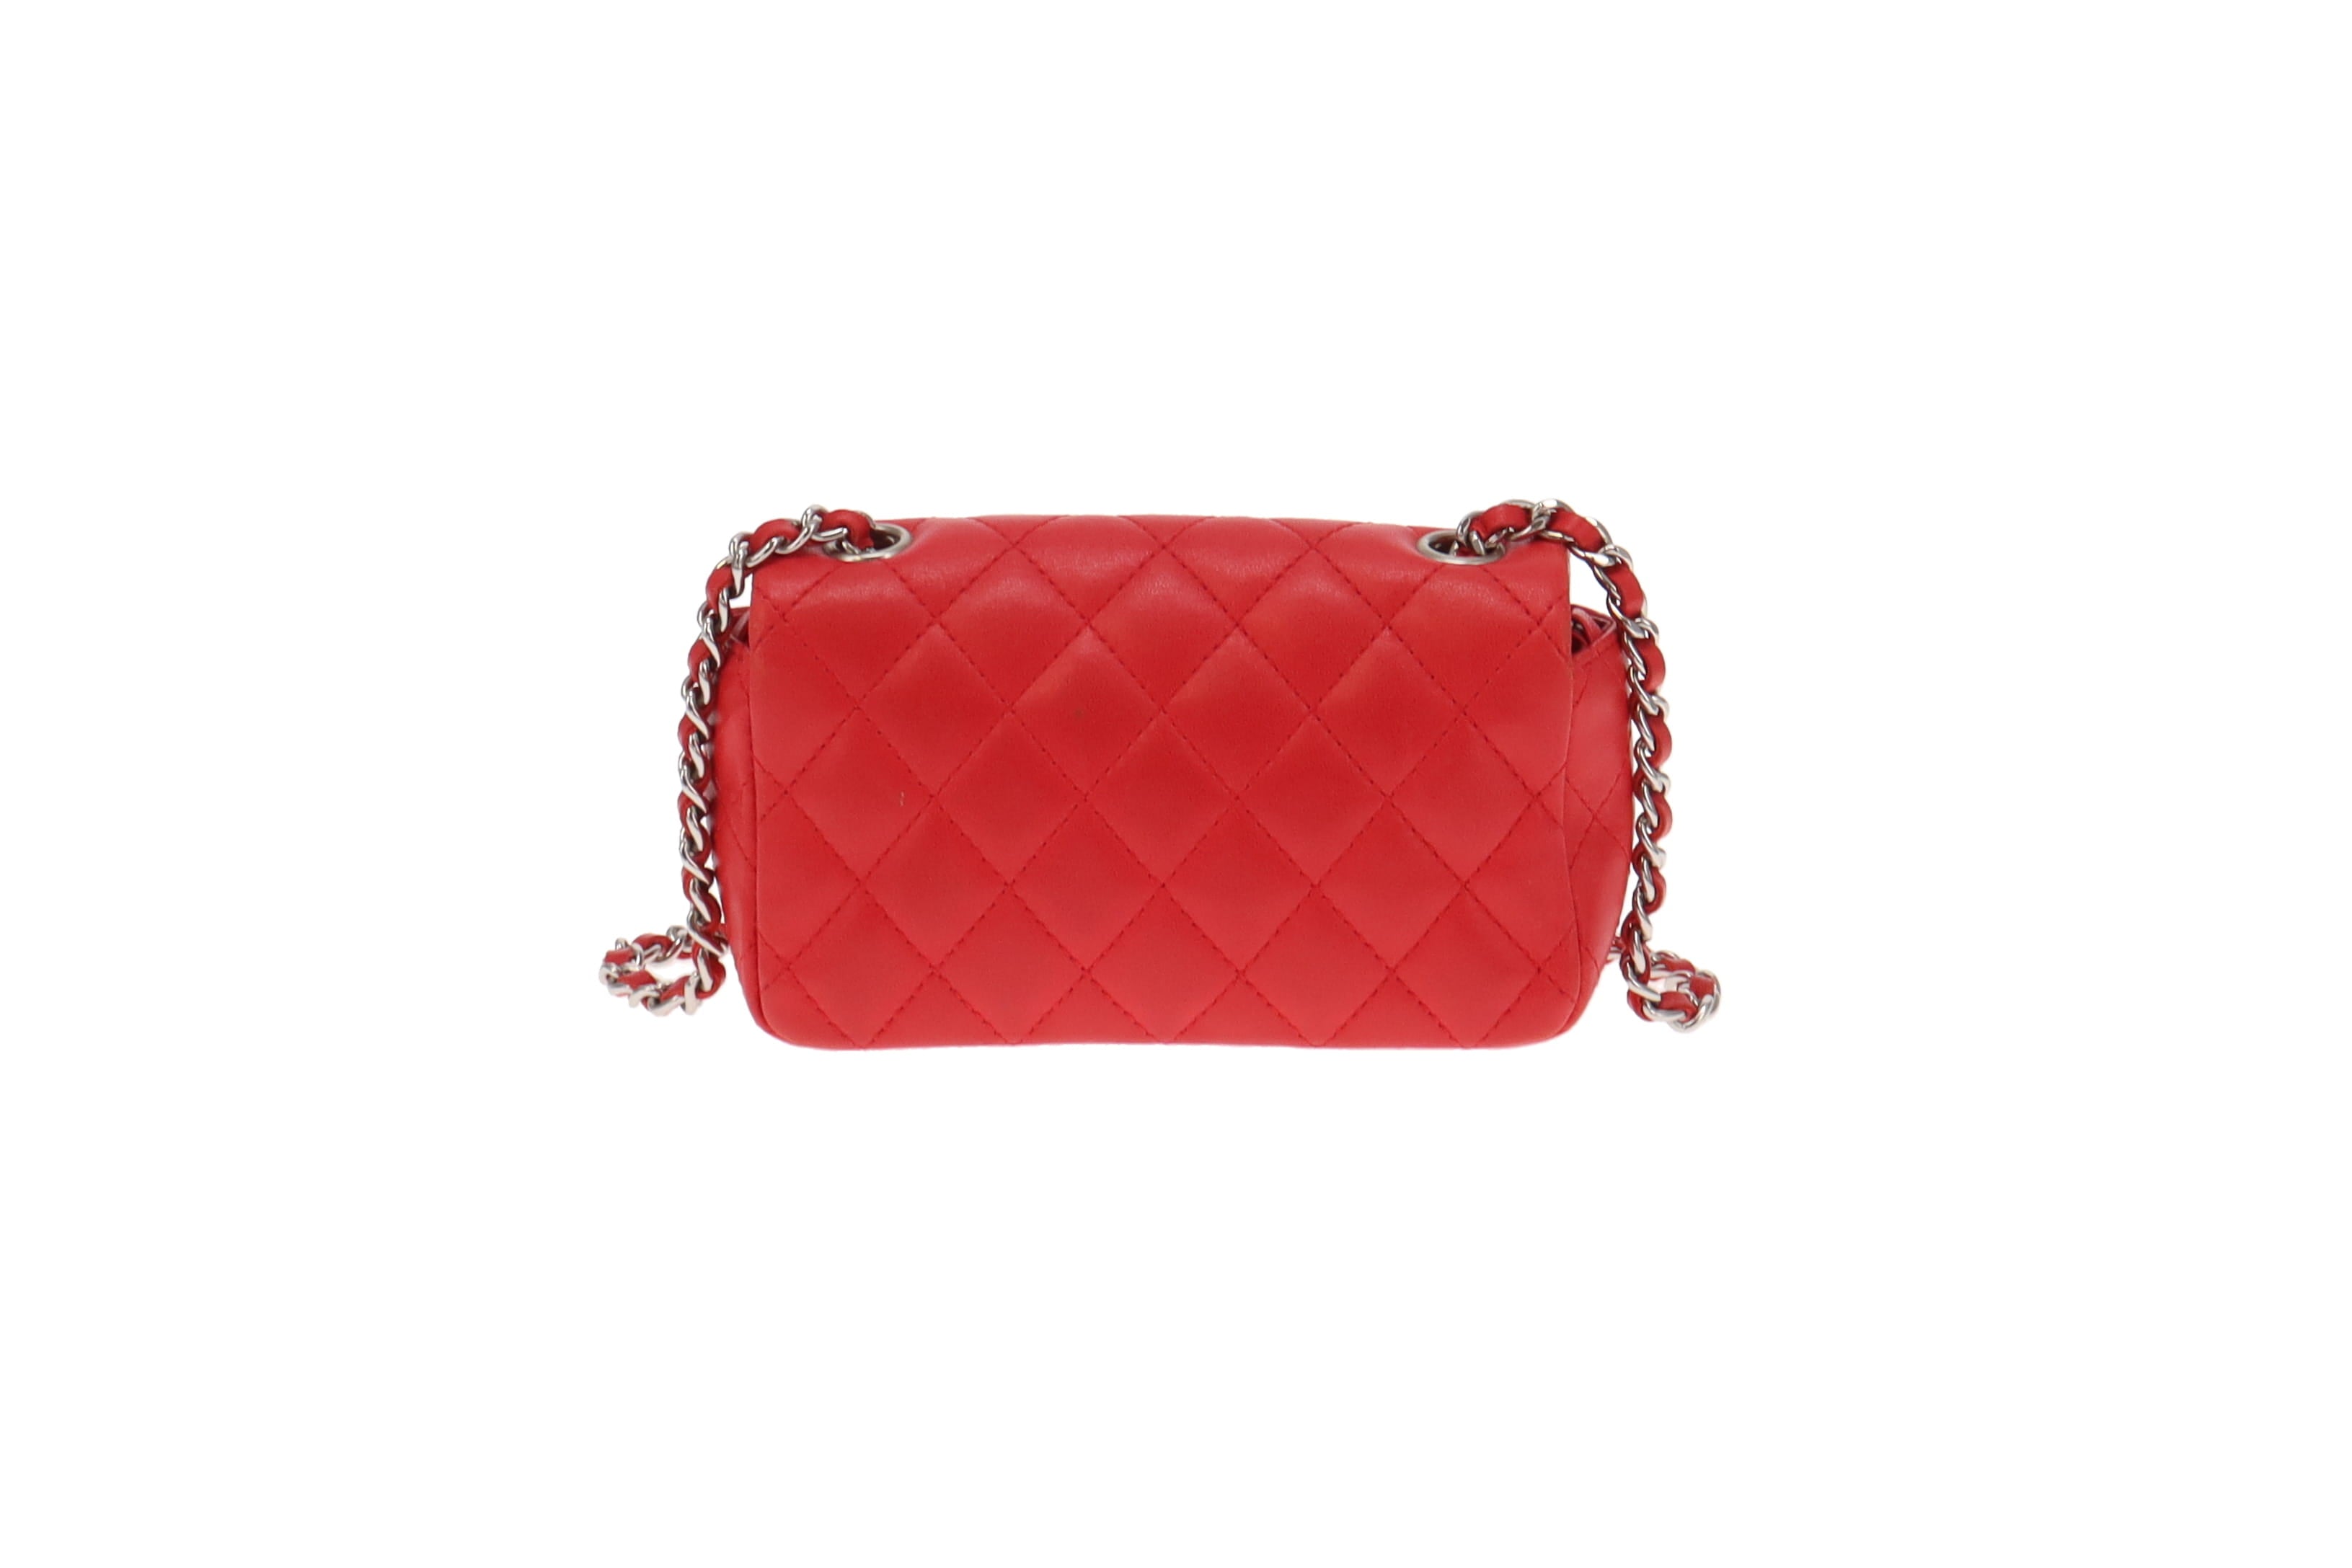 CHANEL  Red Crinkled Leather Boy Chain Flap Bag  SilverAged  Shoul   BougieHabit